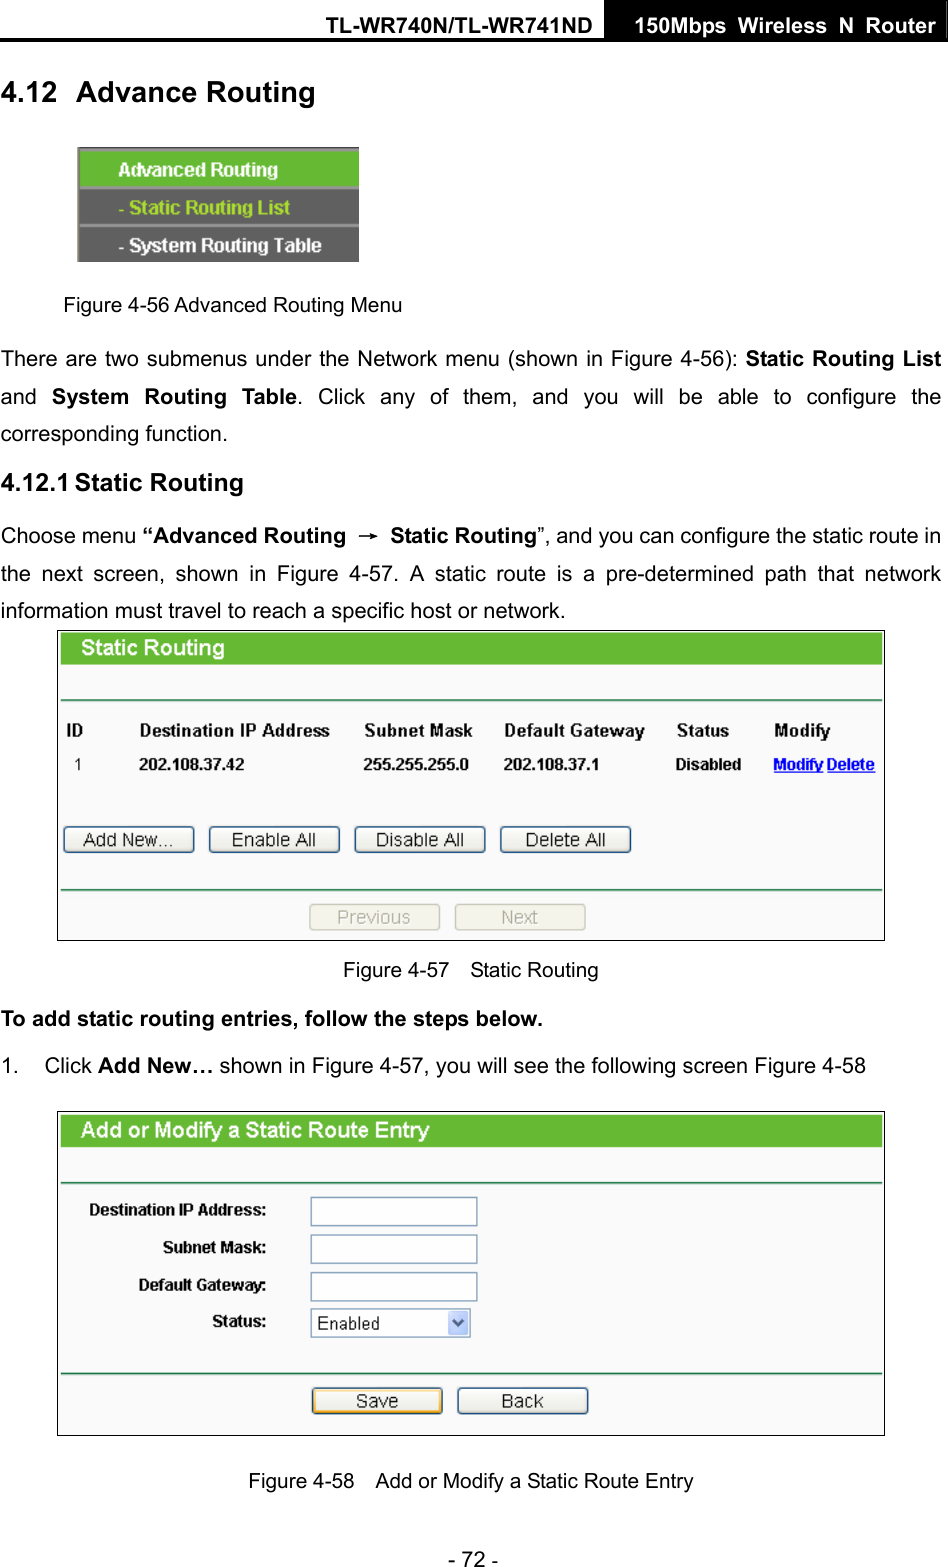 TL-WR740N/TL-WR741ND 150Mbps Wireless N Router - 72 - 4.12  Advance Routing  Figure 4-56 Advanced Routing Menu There are two submenus under the Network menu (shown in Figure 4-56): Static Routing List and  System Routing Table. Click any of them, and you will be able to configure the corresponding function. 4.12.1 Static Routing Choose menu “Advanced Routing  → Static Routing”, and you can configure the static route in the next screen, shown in Figure 4-57. A static route is a pre-determined path that network information must travel to reach a specific host or network.  Figure 4-57  Static Routing To add static routing entries, follow the steps below. 1. Click Add New… shown in Figure 4-57, you will see the following screen Figure 4-58  Figure 4-58    Add or Modify a Static Route Entry 